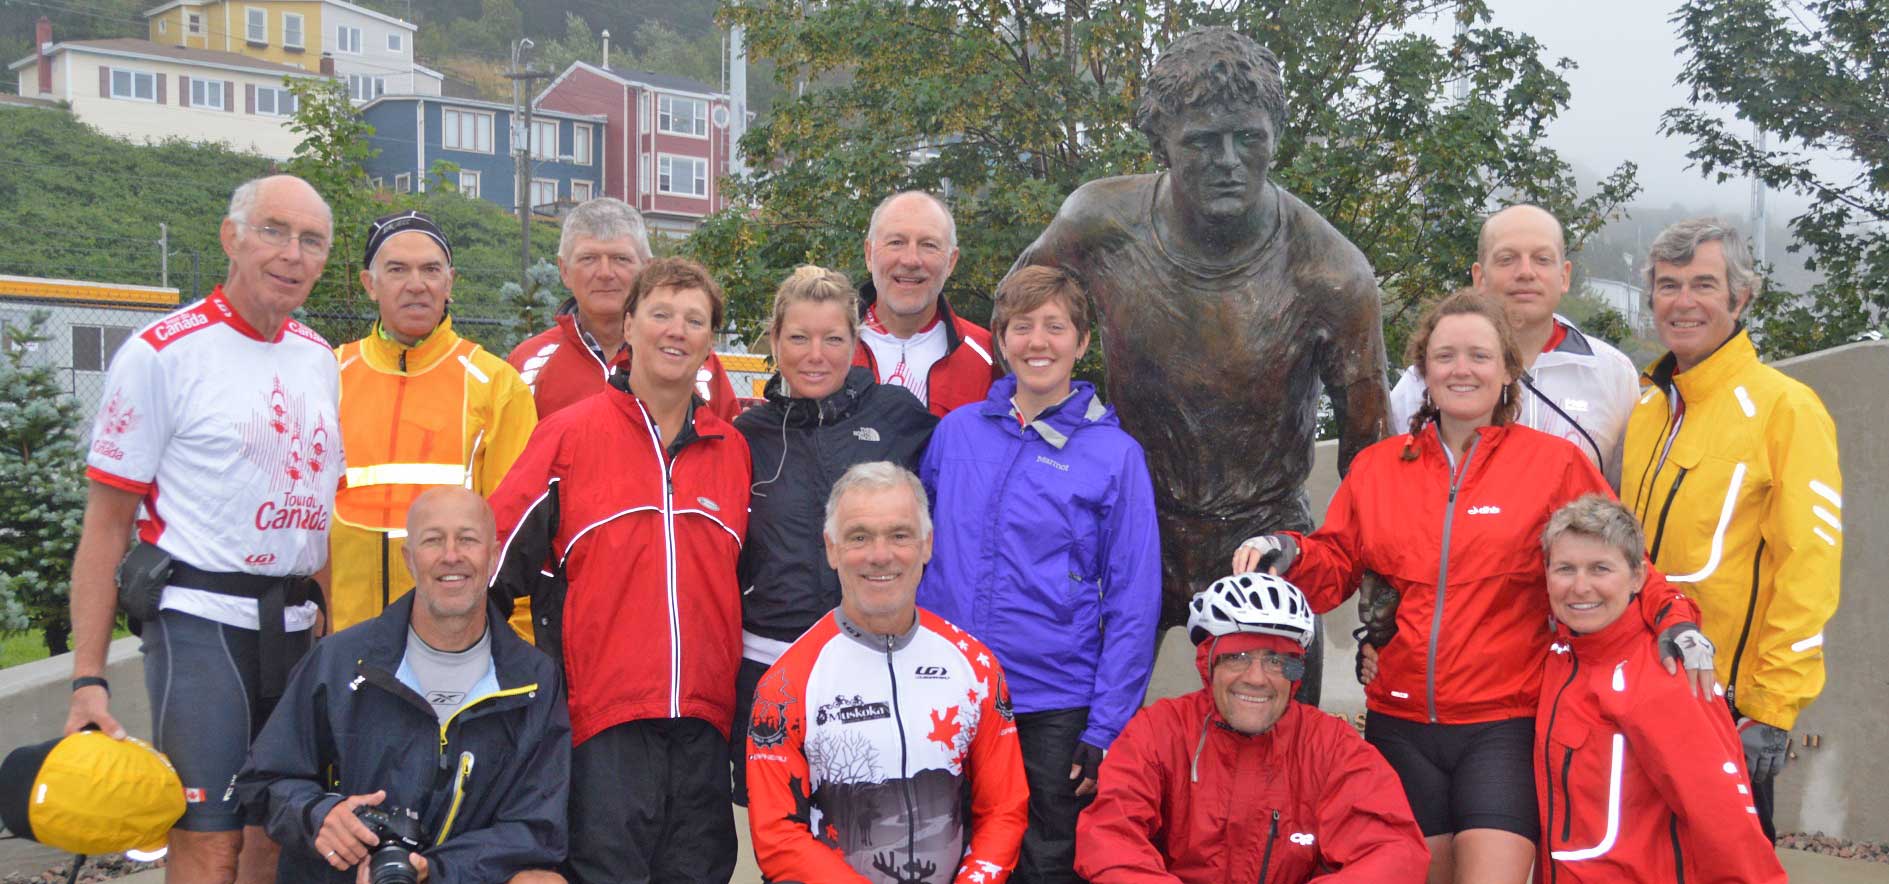 Tour du Canada riders at Terry Fox monument in St. John's Newfoundland